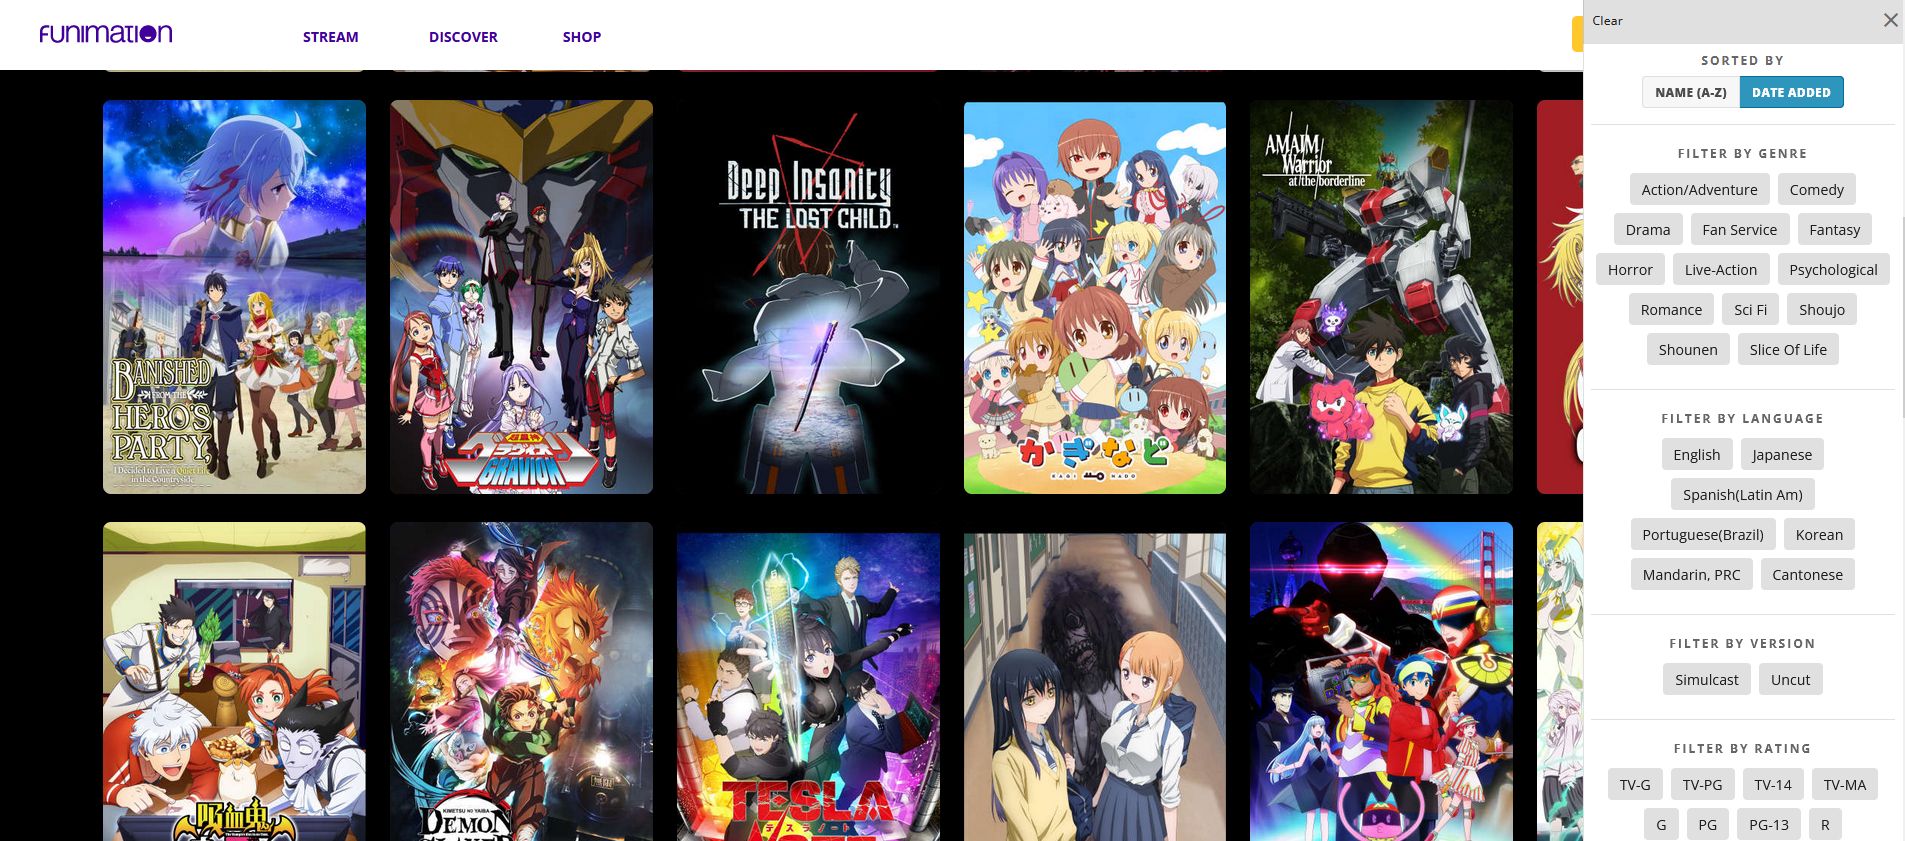 funimation filtered shows